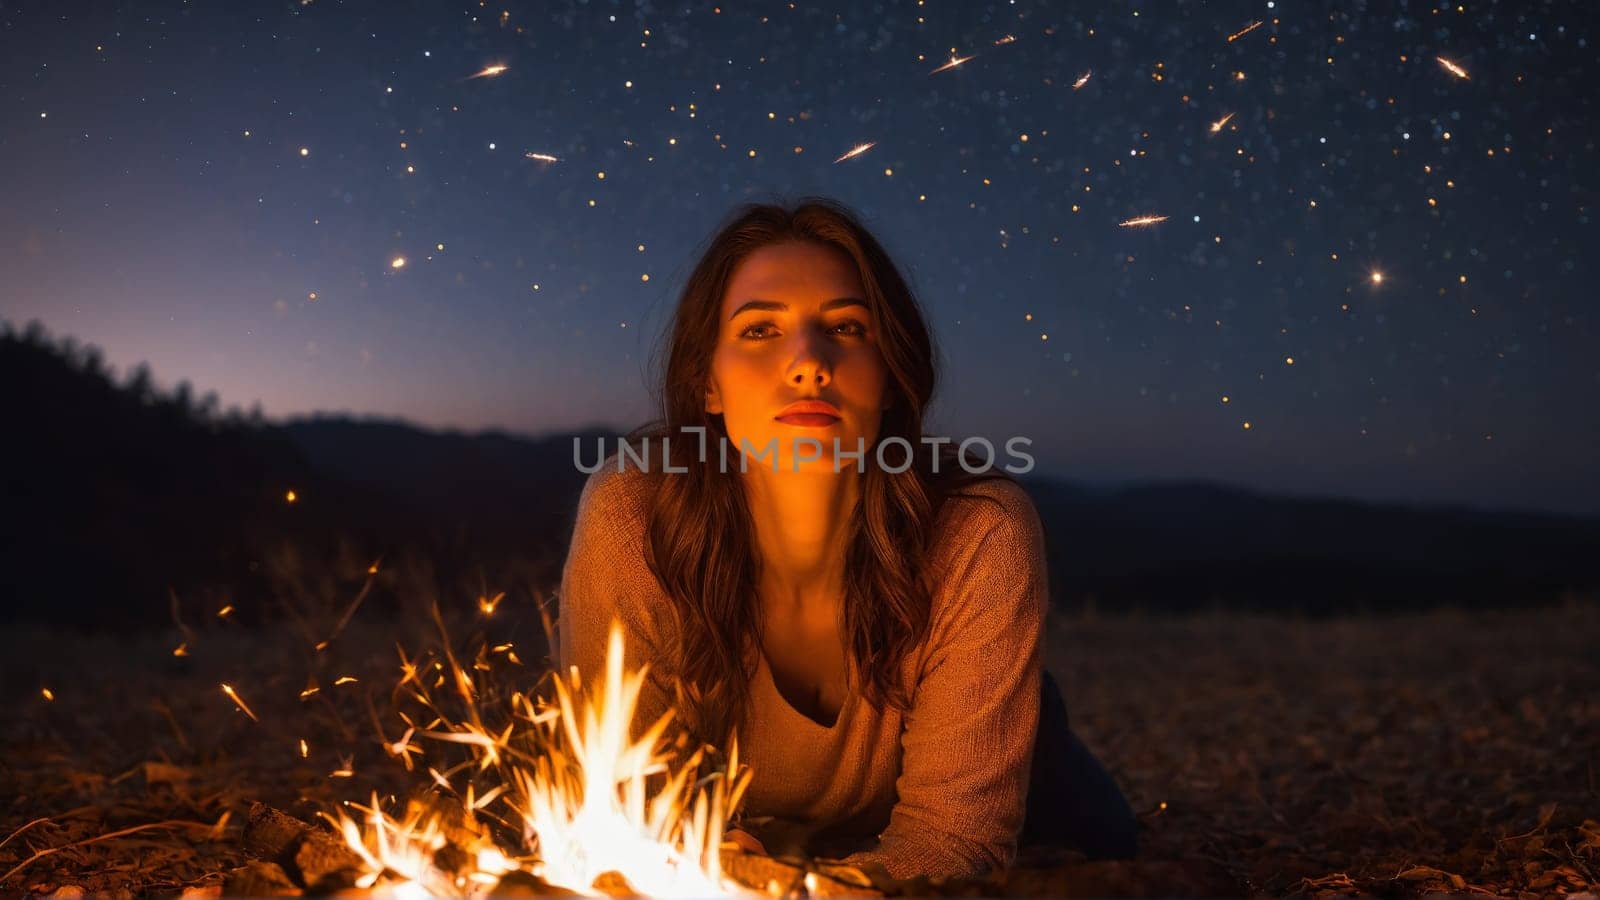 Blissful woman stargazing in a clear night sky shooting stars streaking campfire embers floating warm by panophotograph